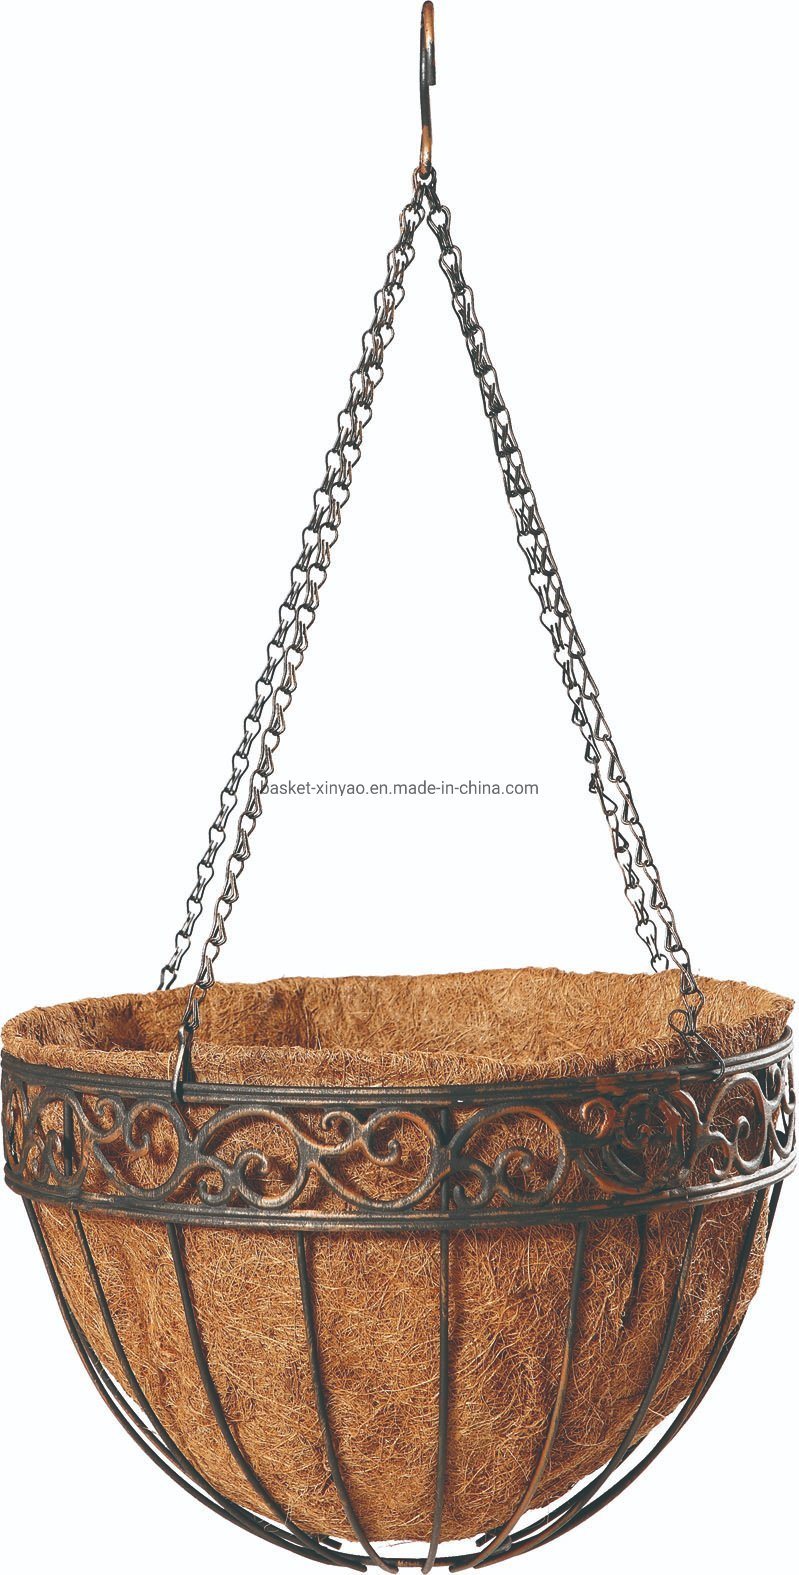 Wrought Iron Hanging Flower Baskets Planter for Sale (XY15057)